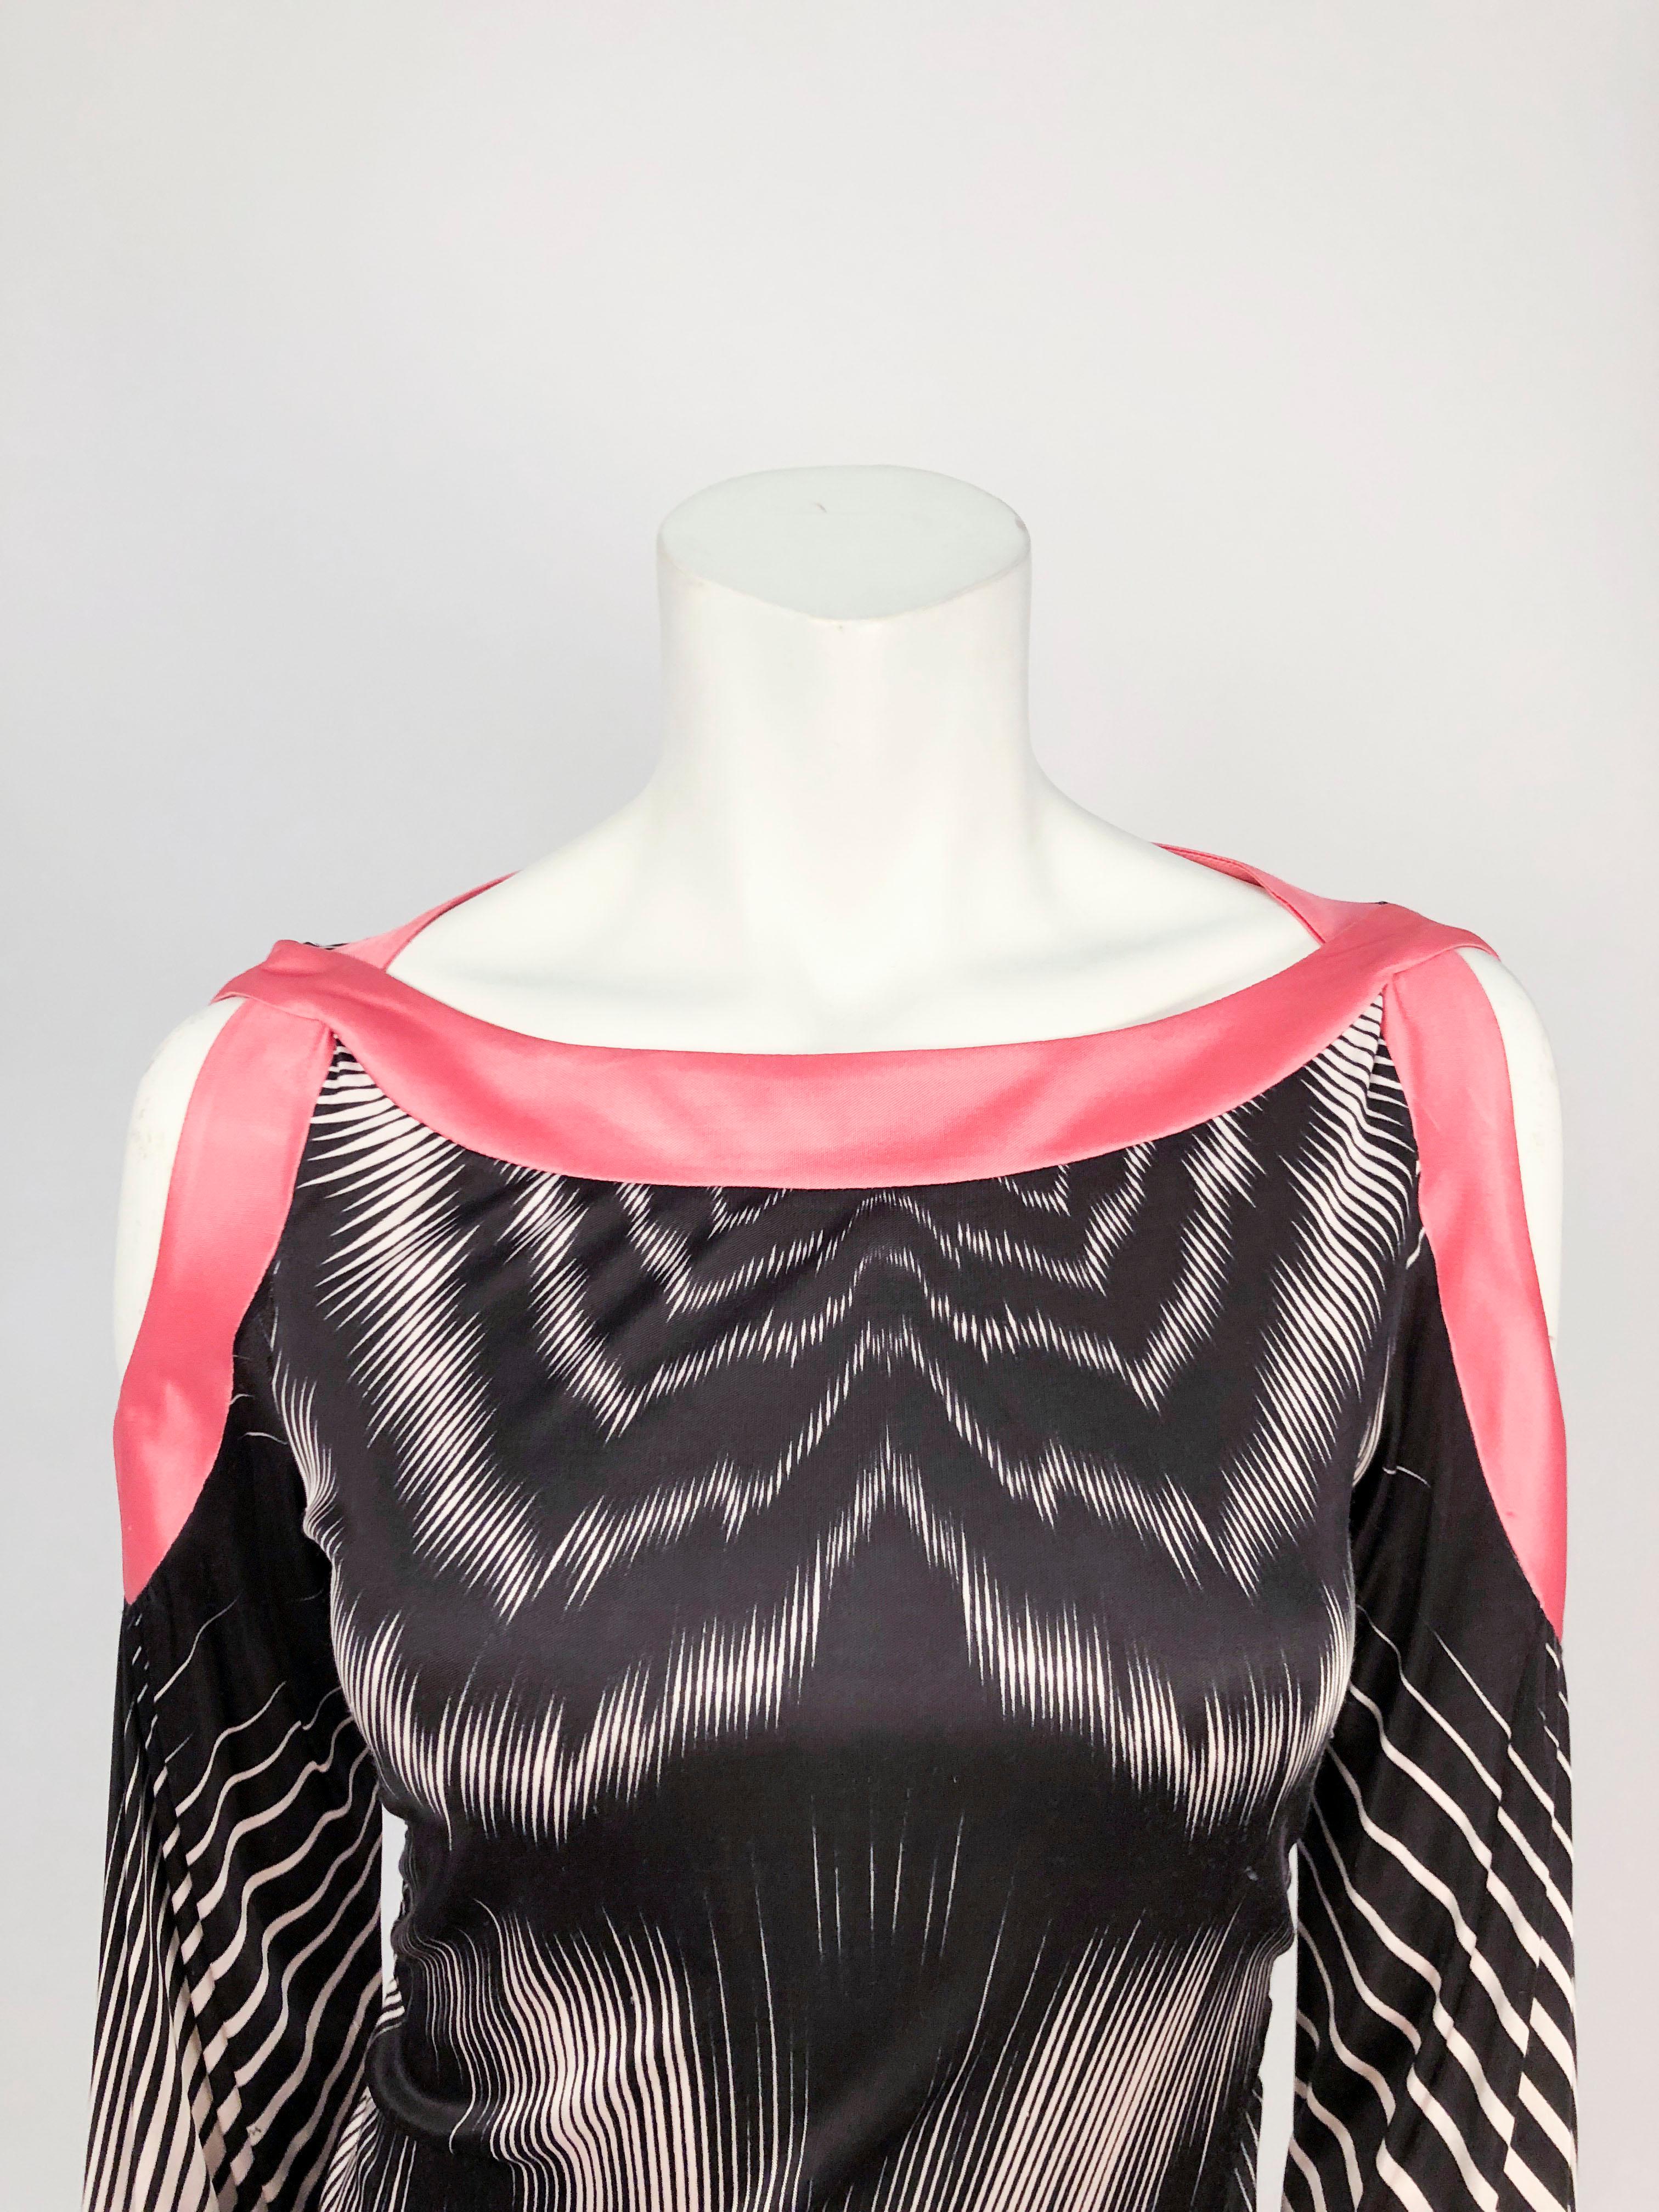 Women's 2000s Missoni Printed Blouse with Bell Sleeves